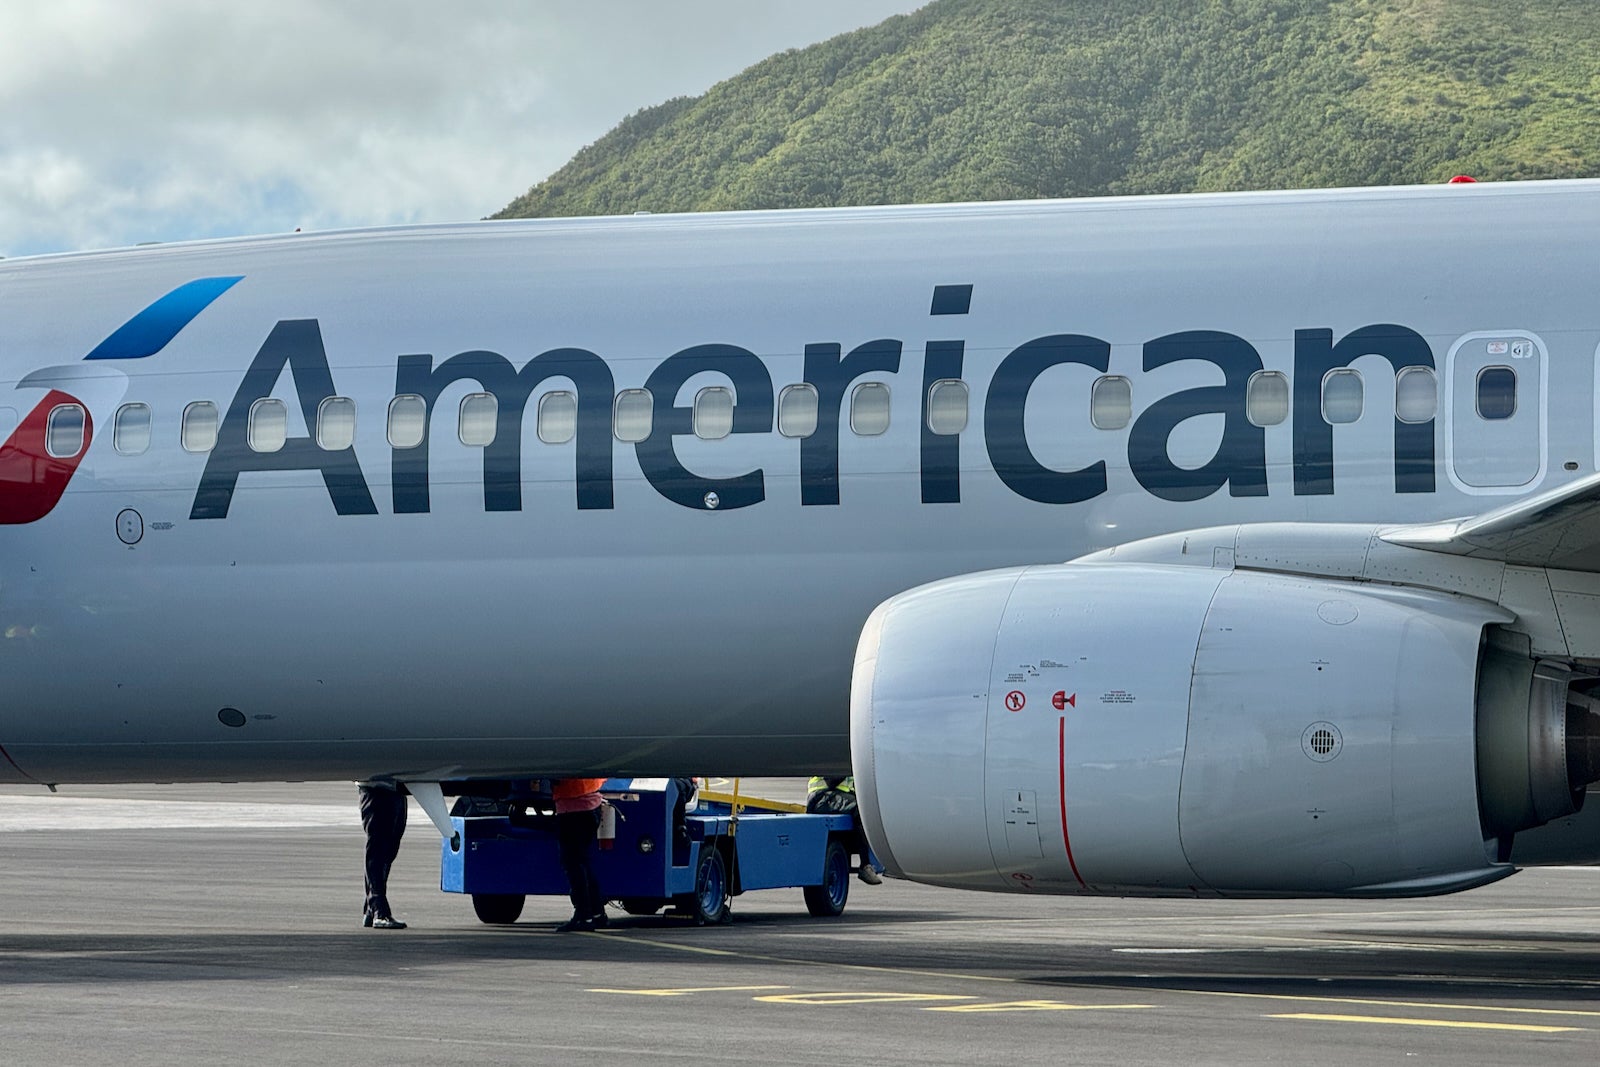 American Airways unveils 10 modifications to the AAdvantage program